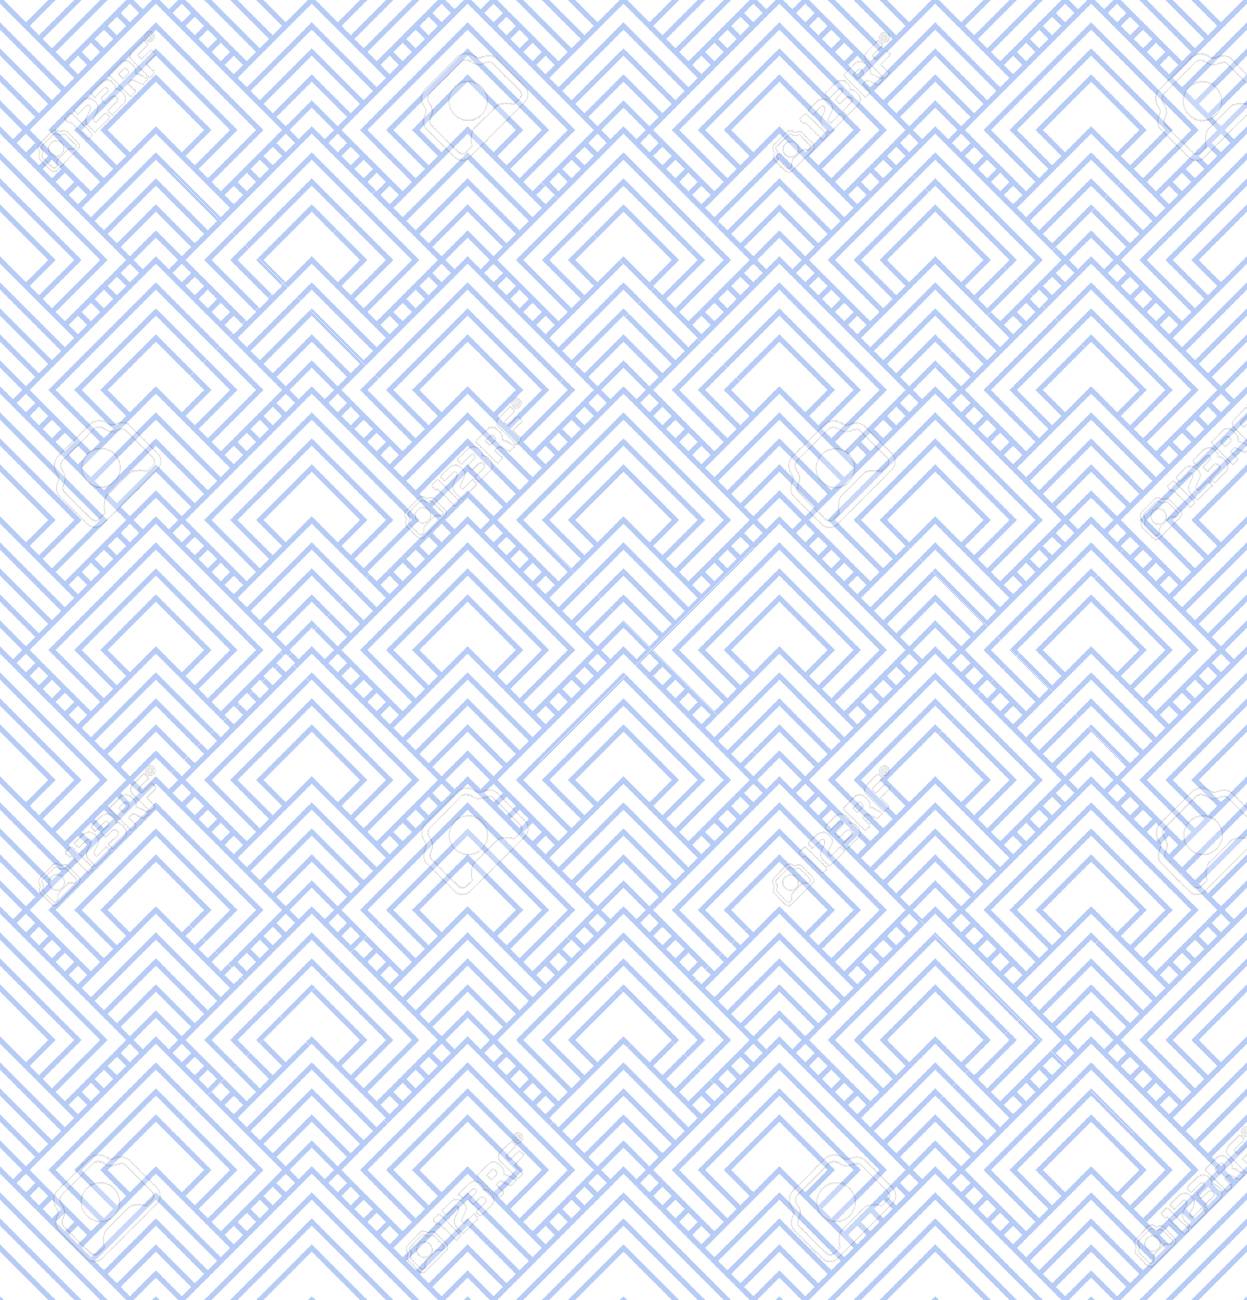 Pale Blue And White Diamonds Tiles Pattern Repeat Background Stock